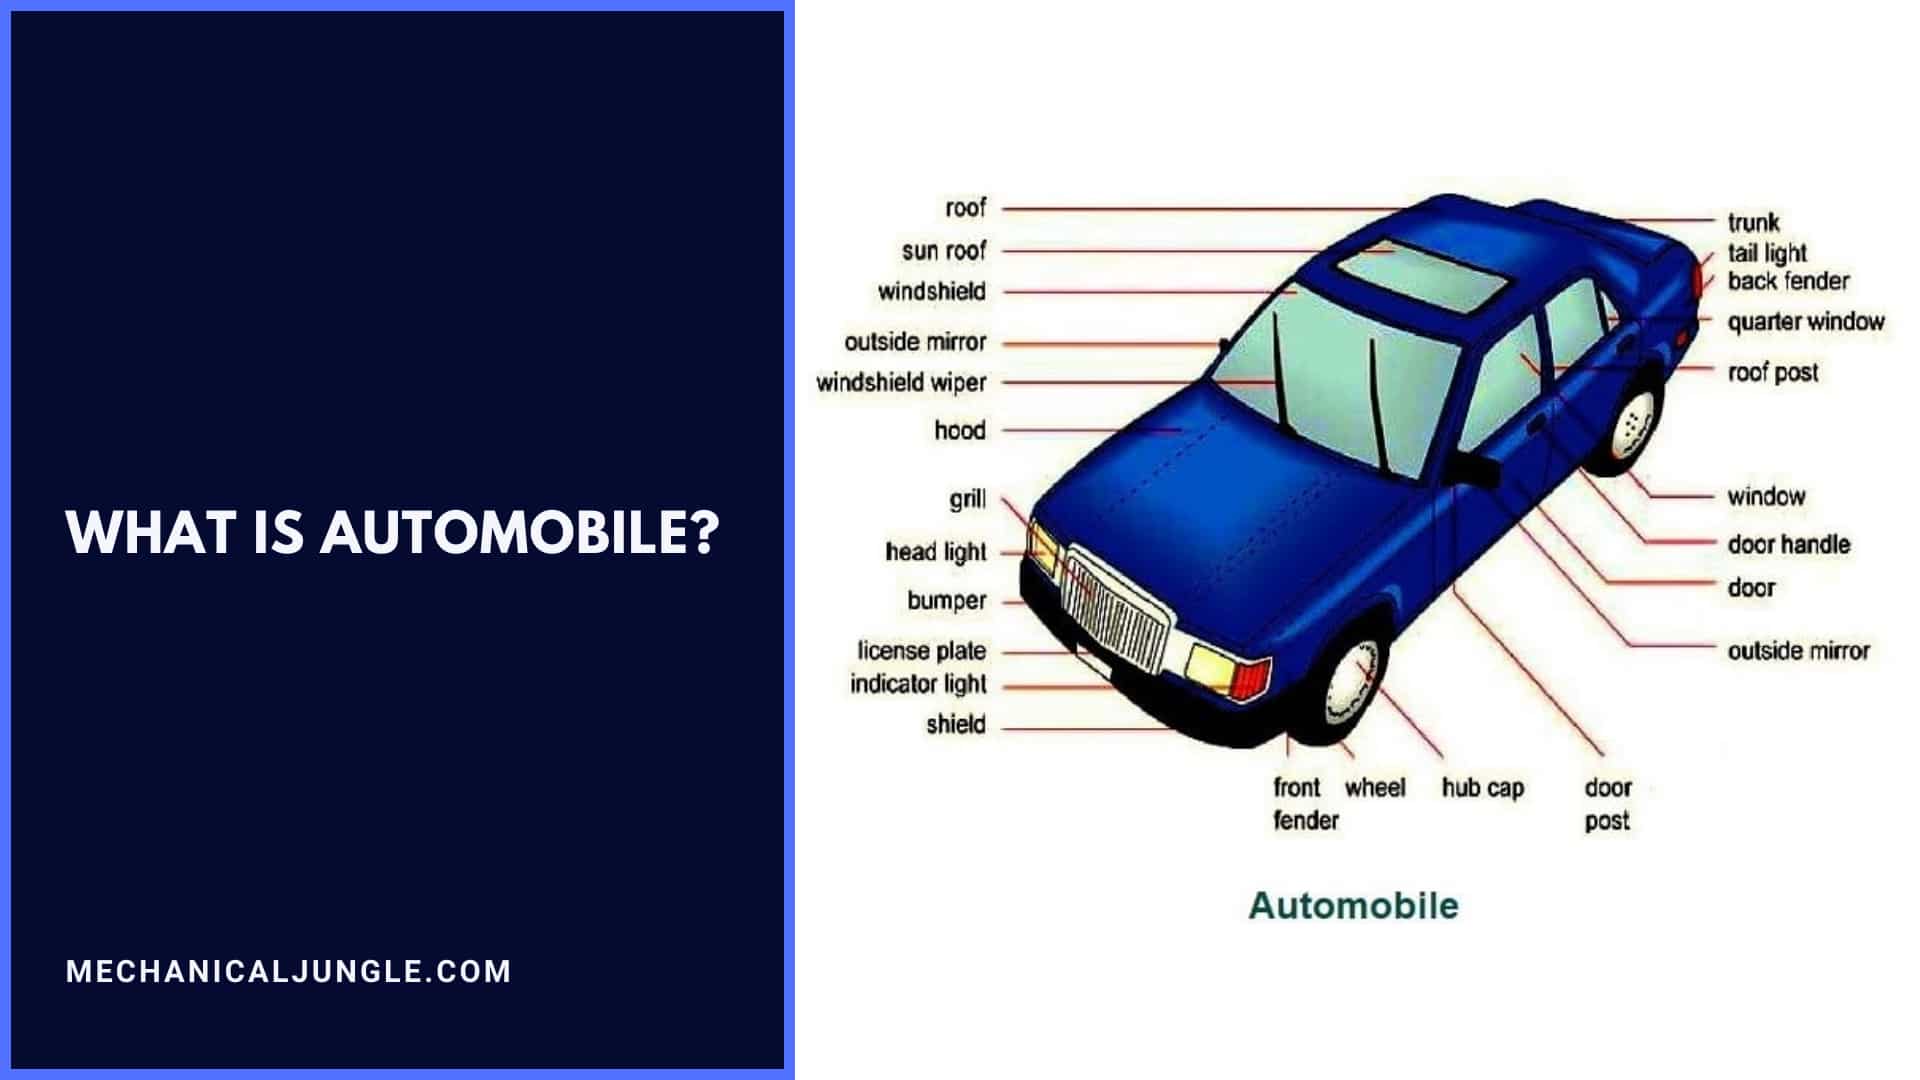 What Is Automobile?